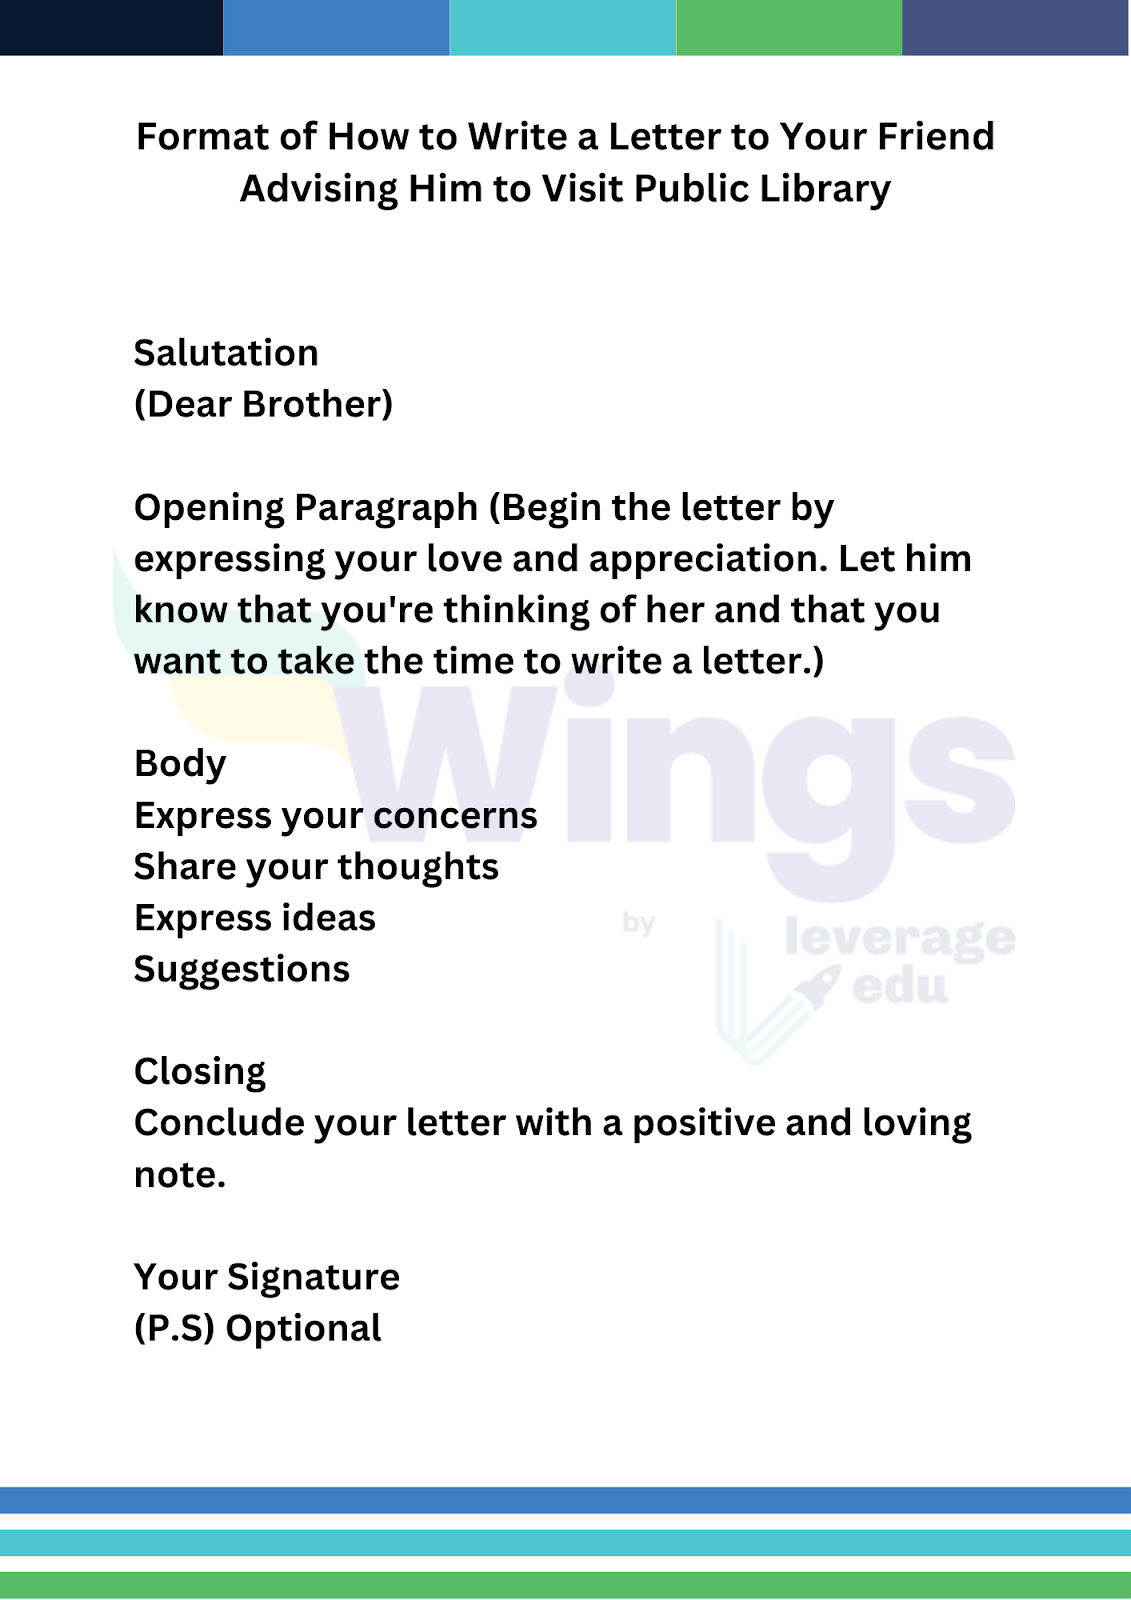 Format of How to Write a Letter to Your Friend Advising Him to Visit Public Library